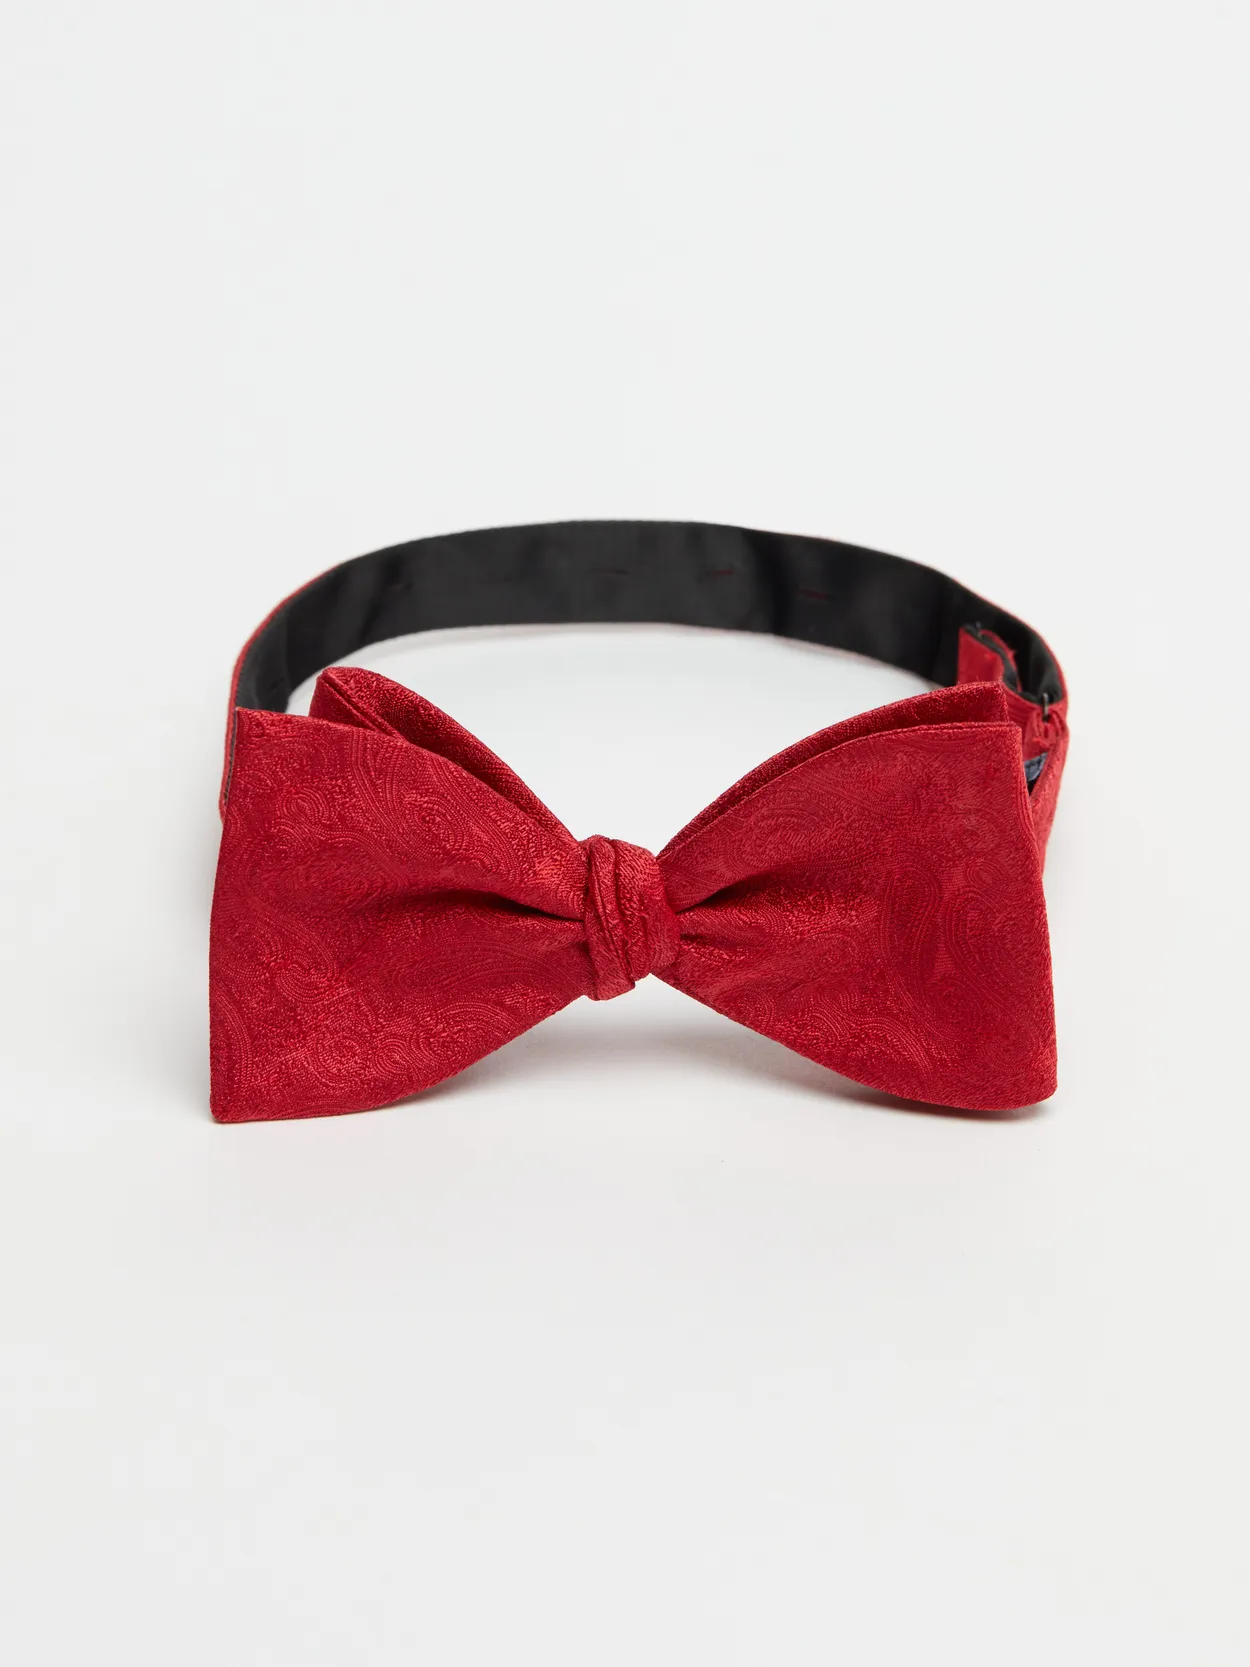 Red Bow Tie Formal